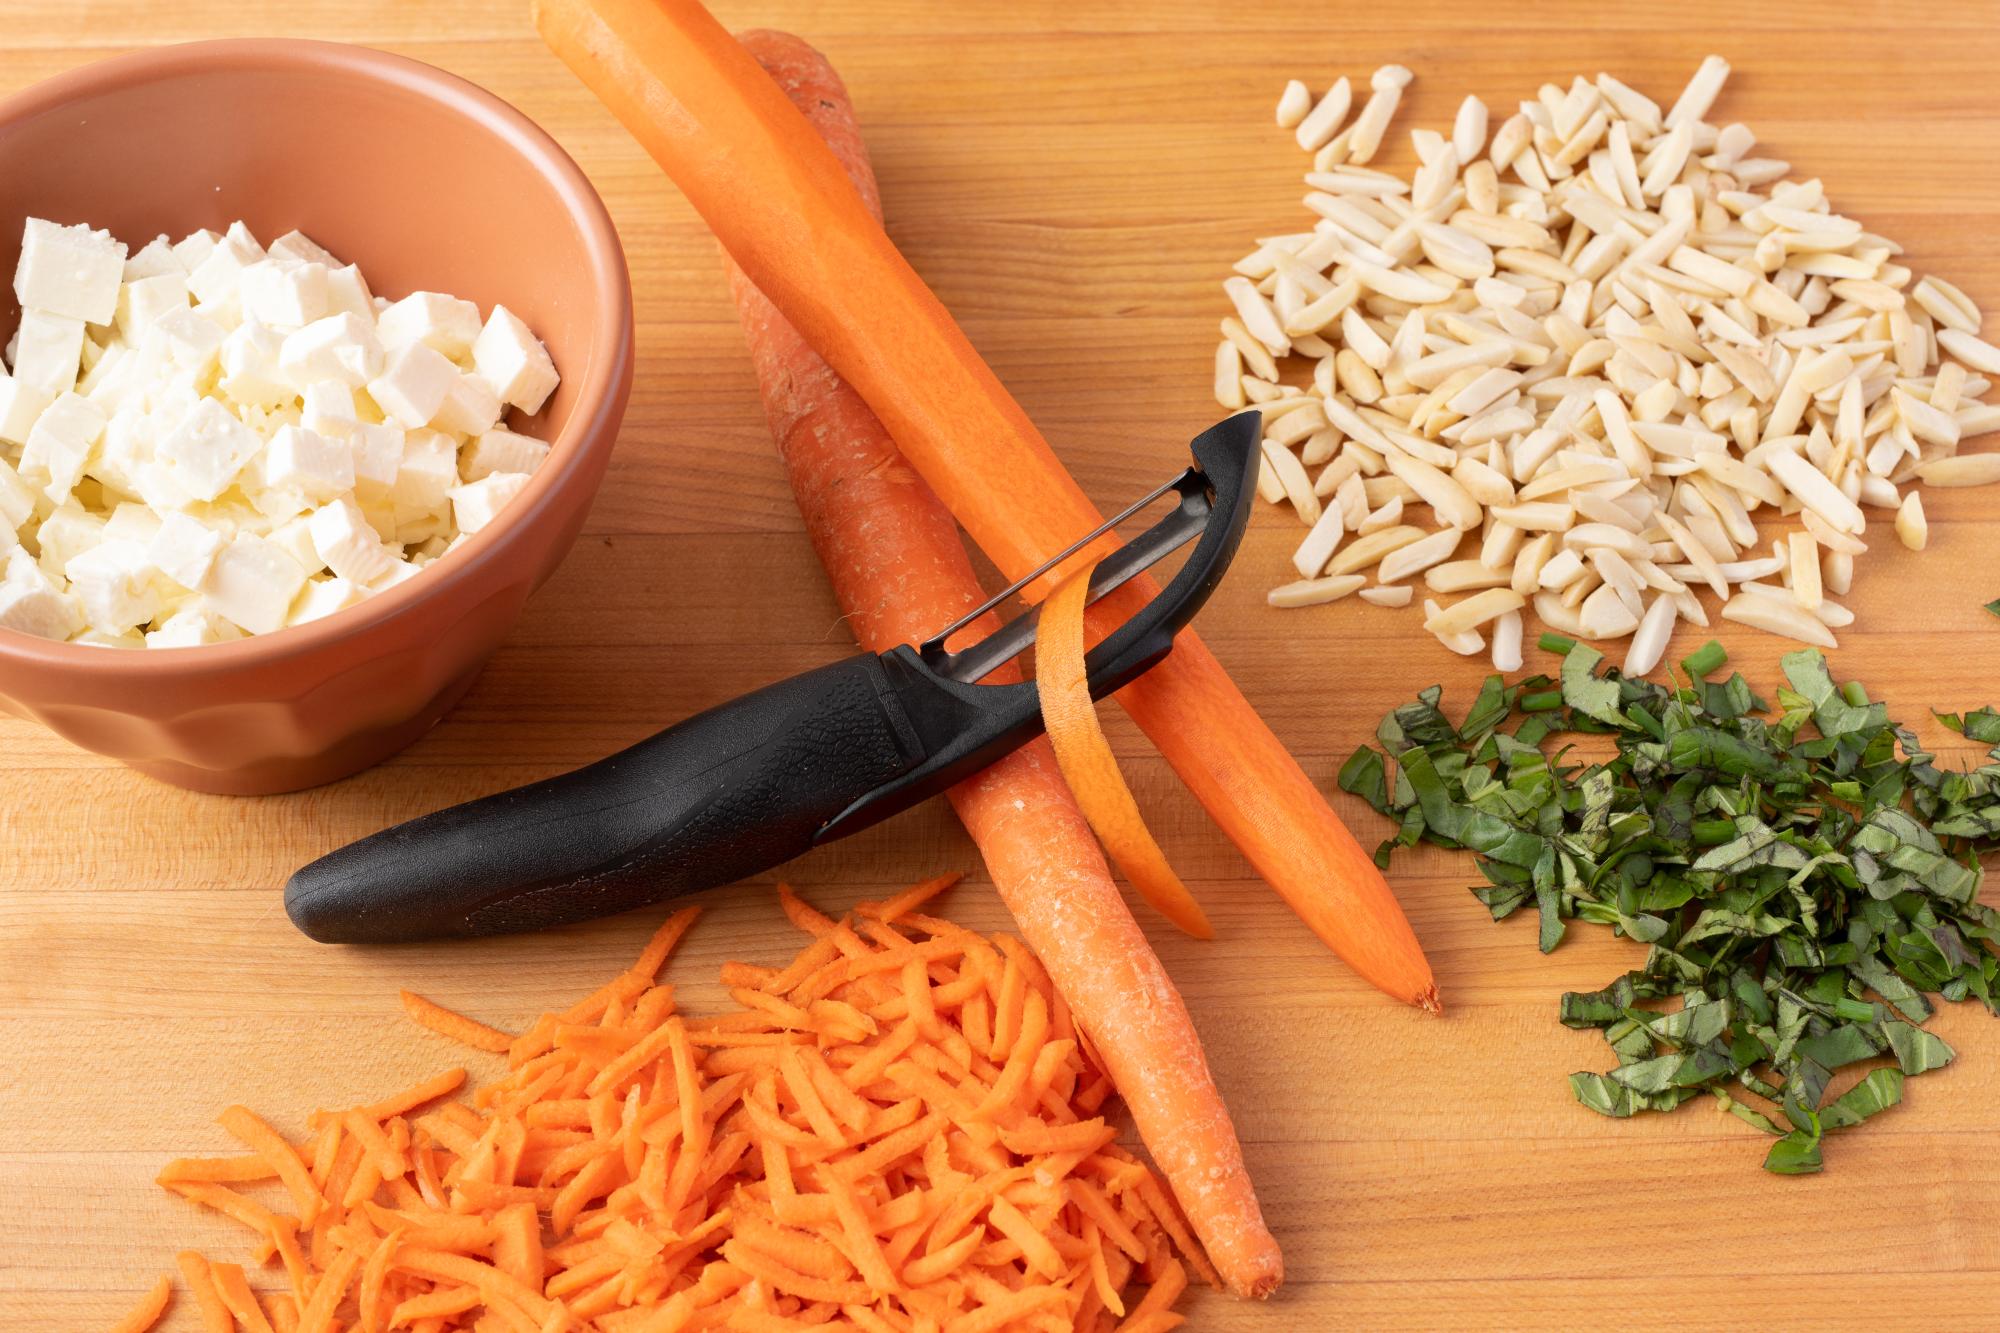 Peel the carrots with the Vegetable Peeler.